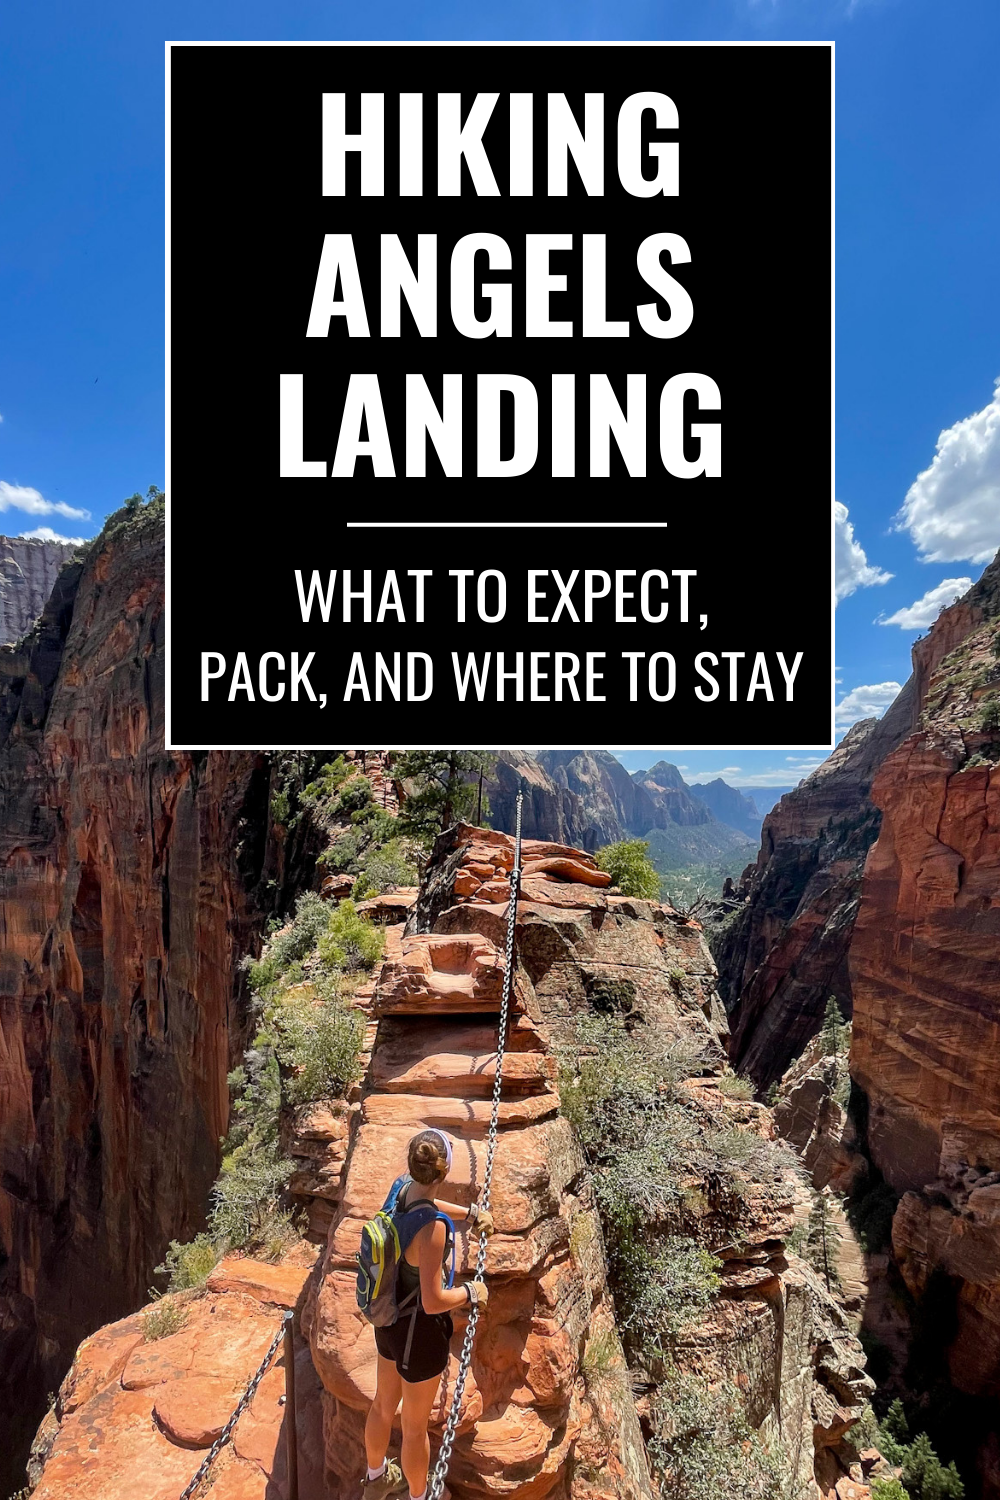 Photo of girl hiking with text: Hiking Angels Landing, what to expect, pack and where to stay